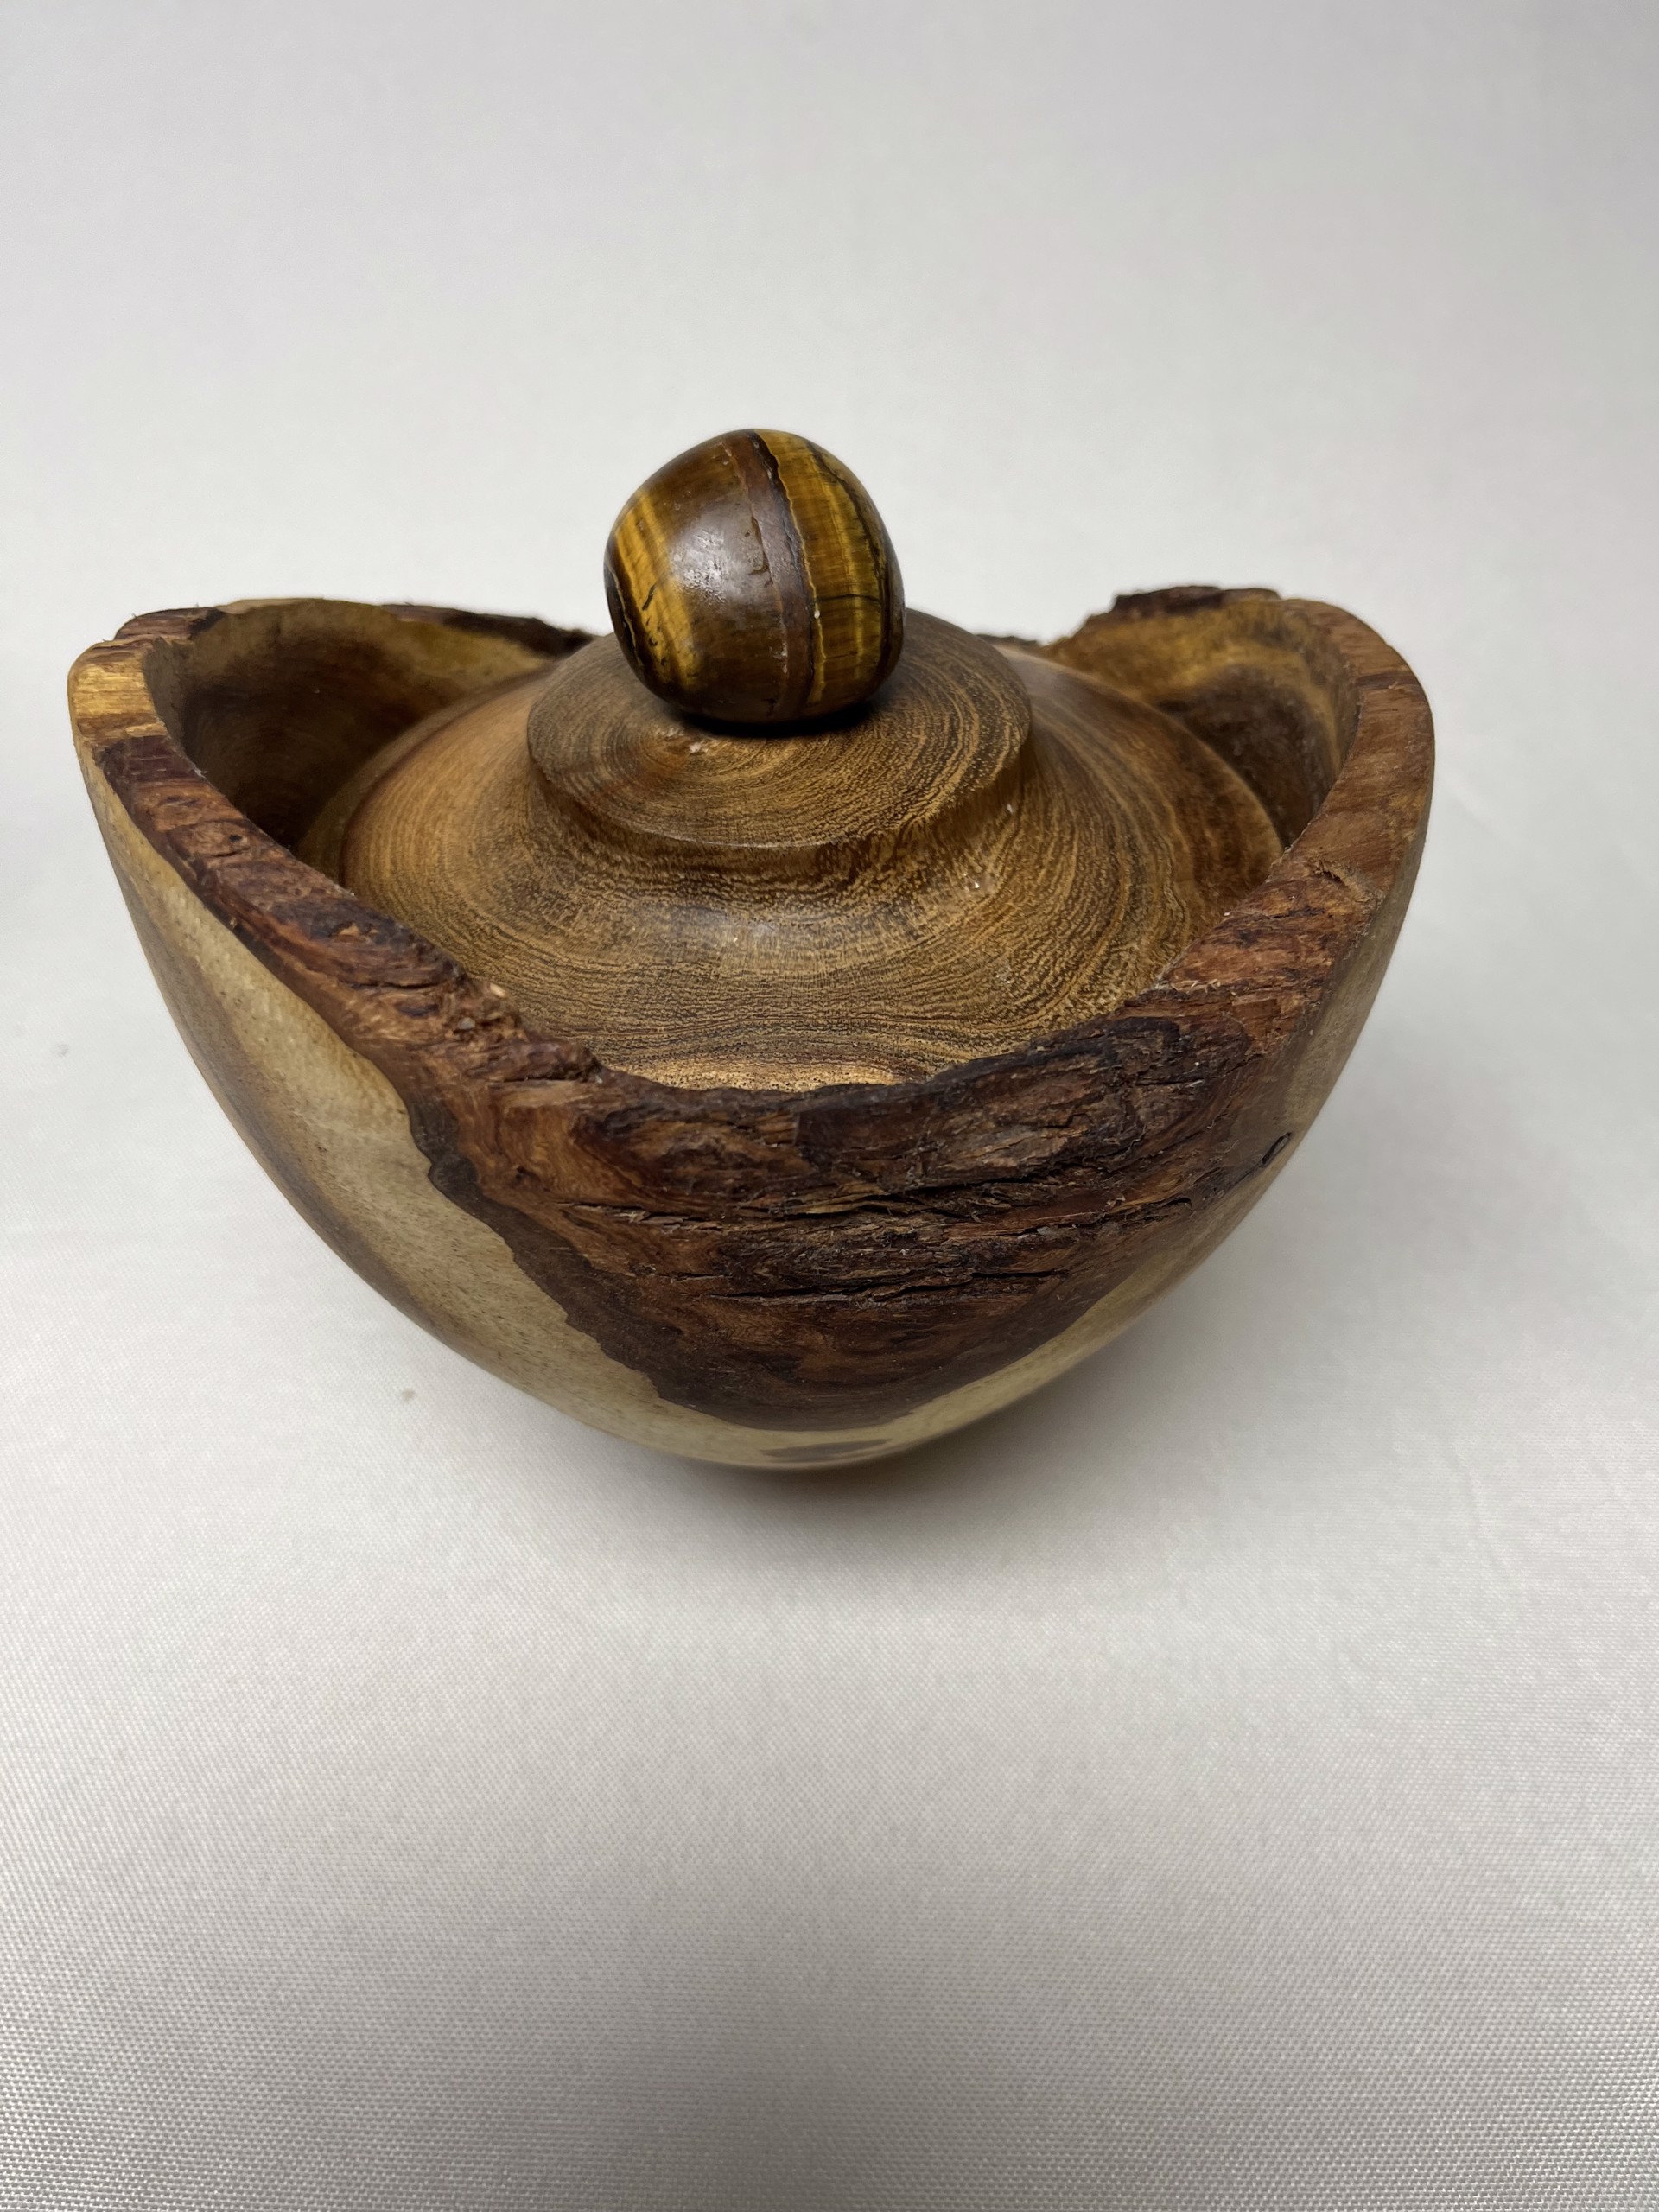 Turned Wood Jar W/Lid #23-25 by Rick Squires